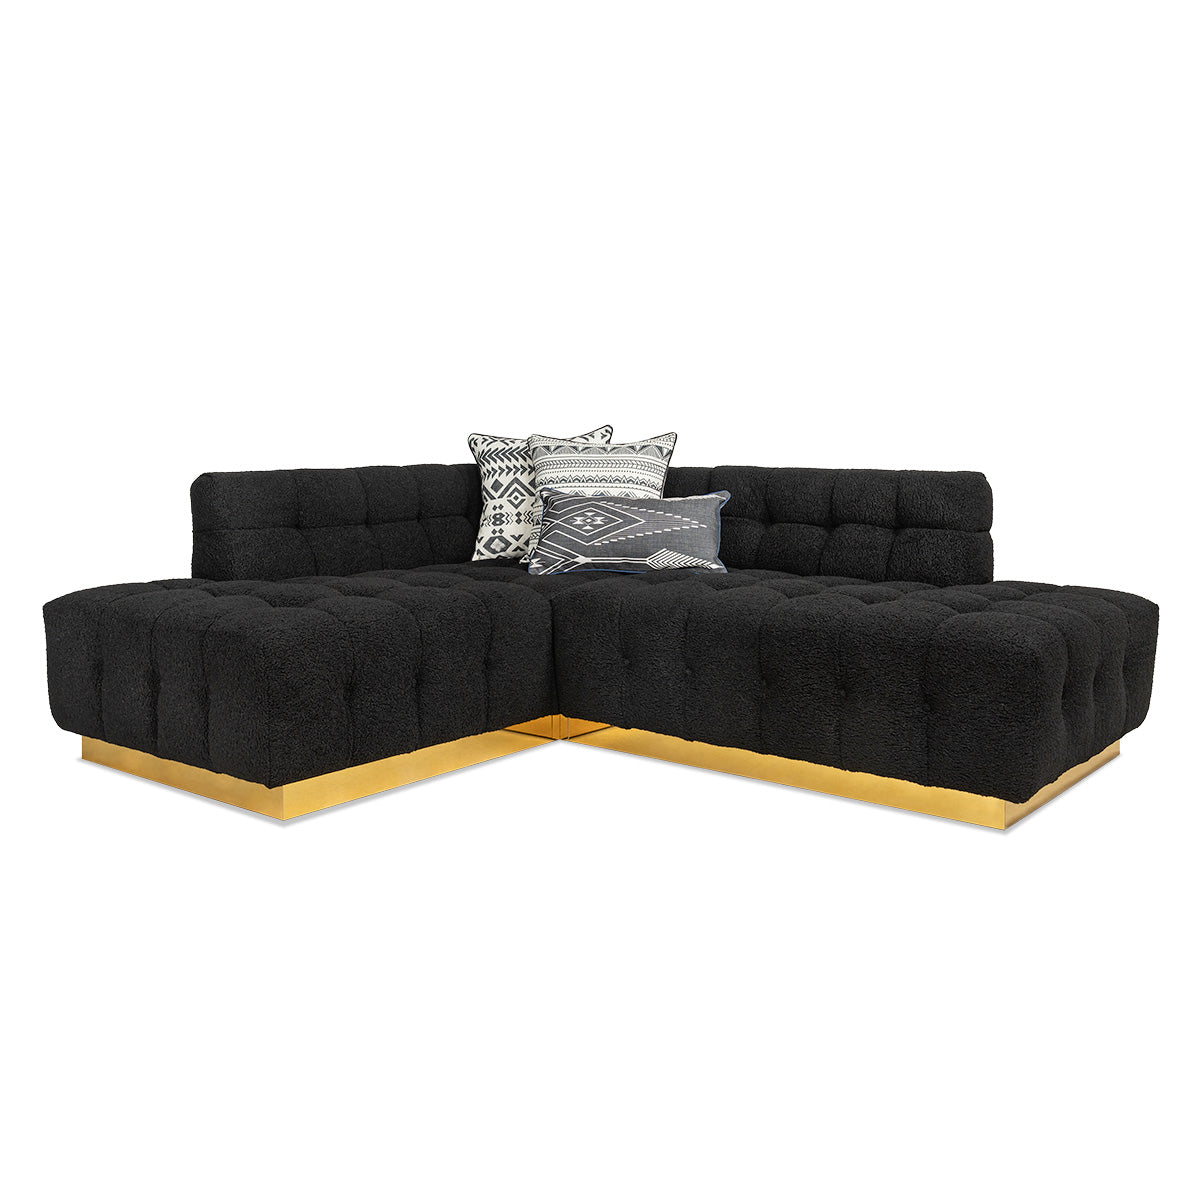 Delano Double Chaise Sectional in Faux Sheepskin